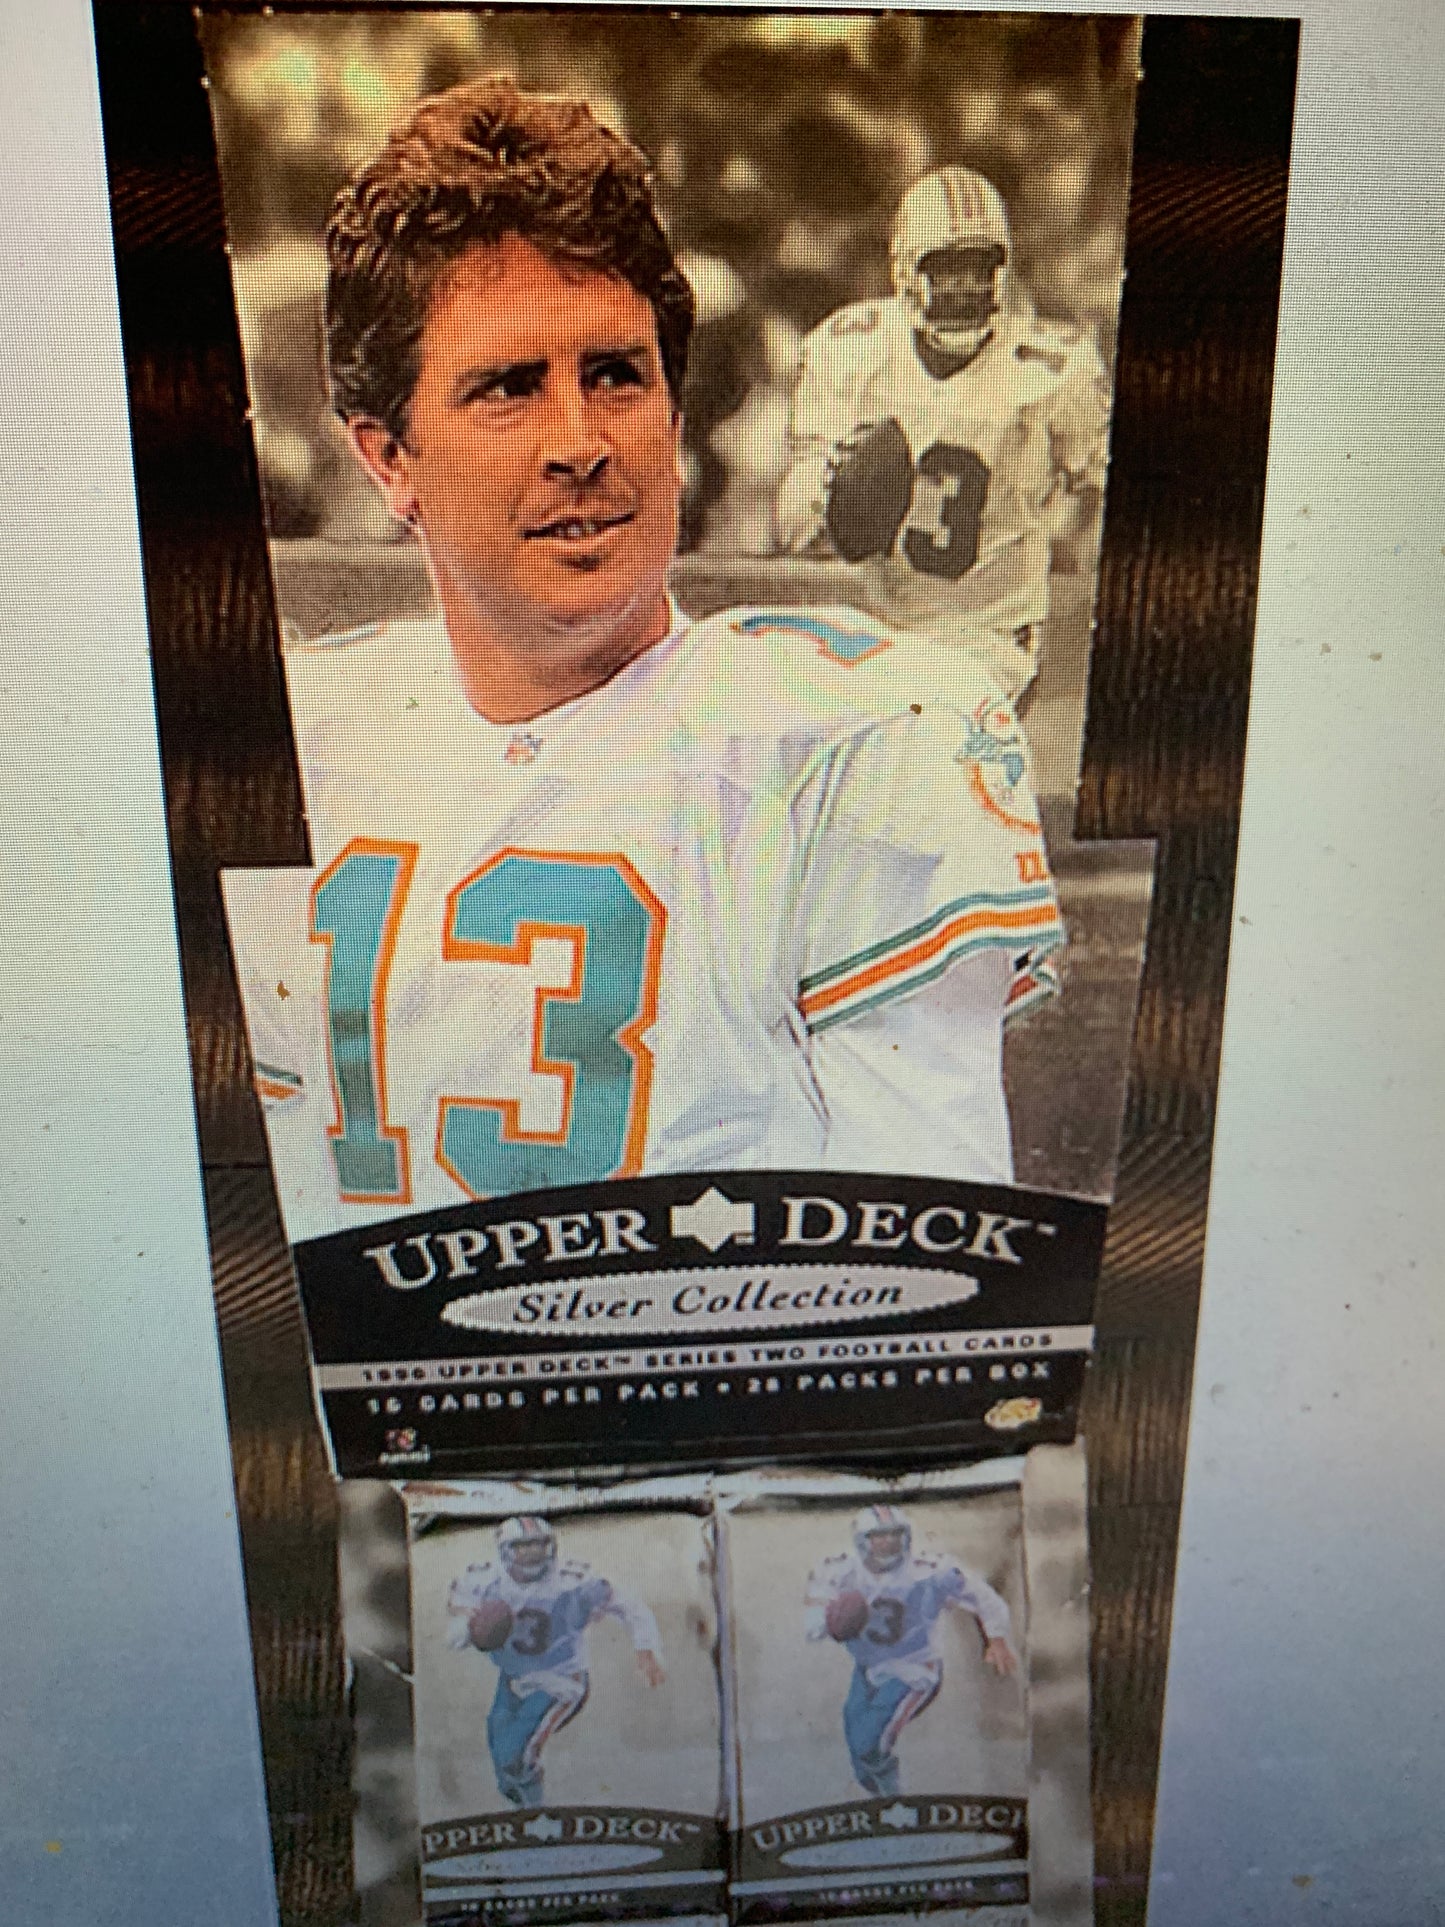 1996 Upper Deck Silver Collection Football Series 2 Single Pack